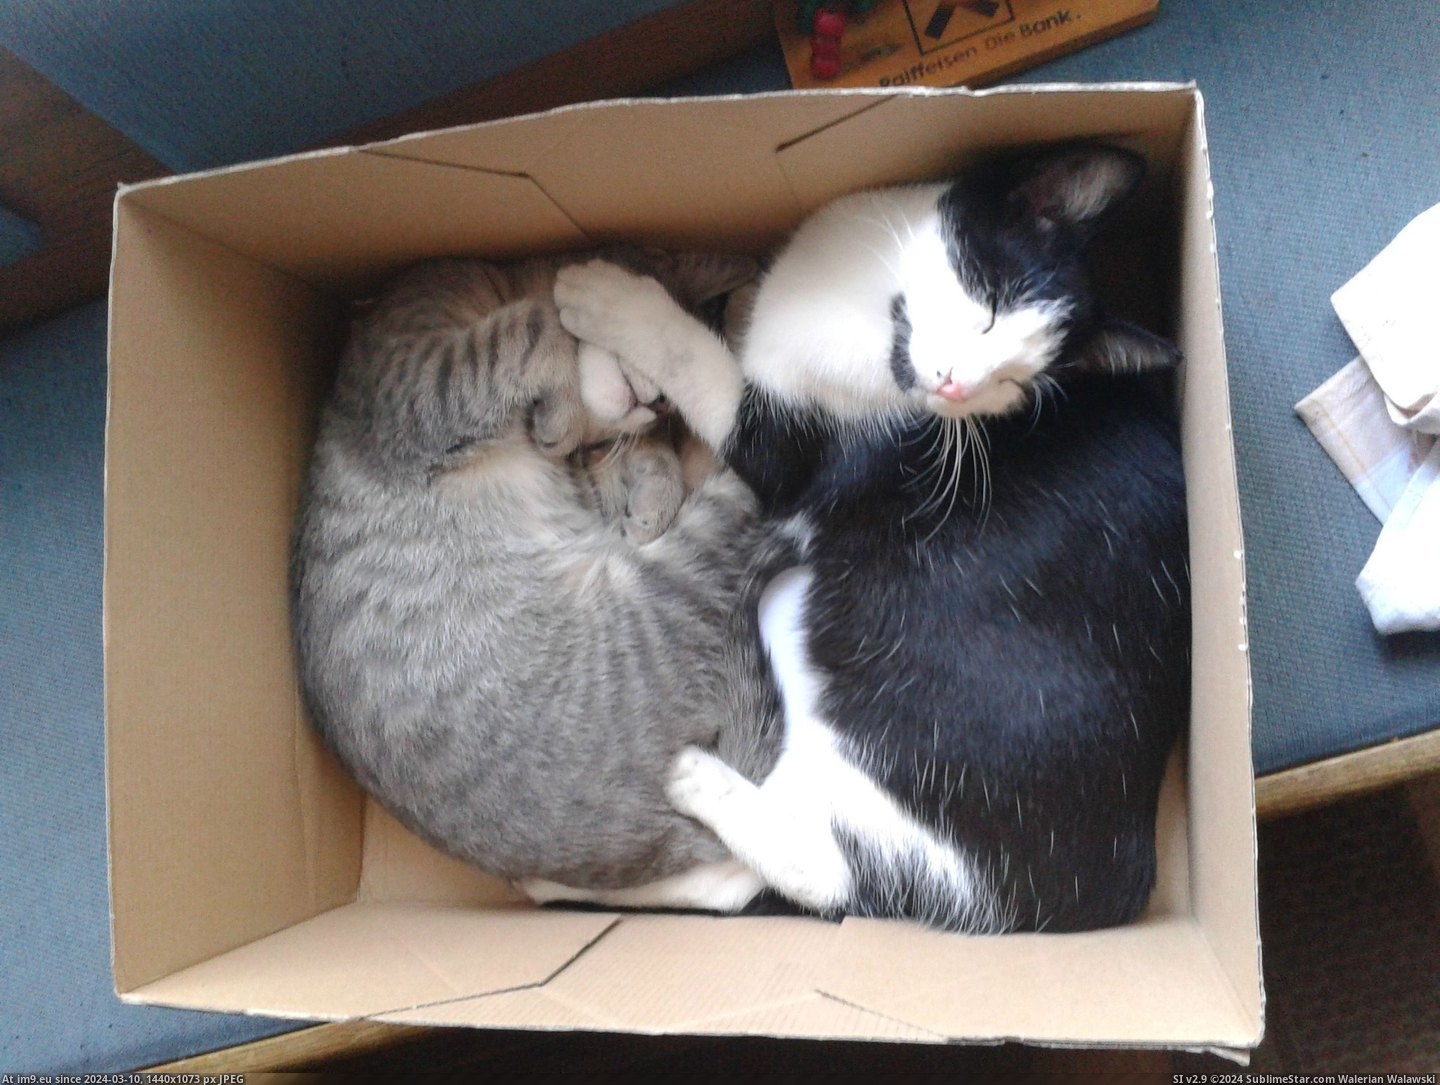 #Cats #Old #Two #Did #Grow #Quickly #Finding #Months #Weeks #Kittens #Few [Cats] A few months back I did a post about finding 2 two-weeks-old kittens. They grow so quickly 4 Pic. (Obraz z album My r/CATS favs))